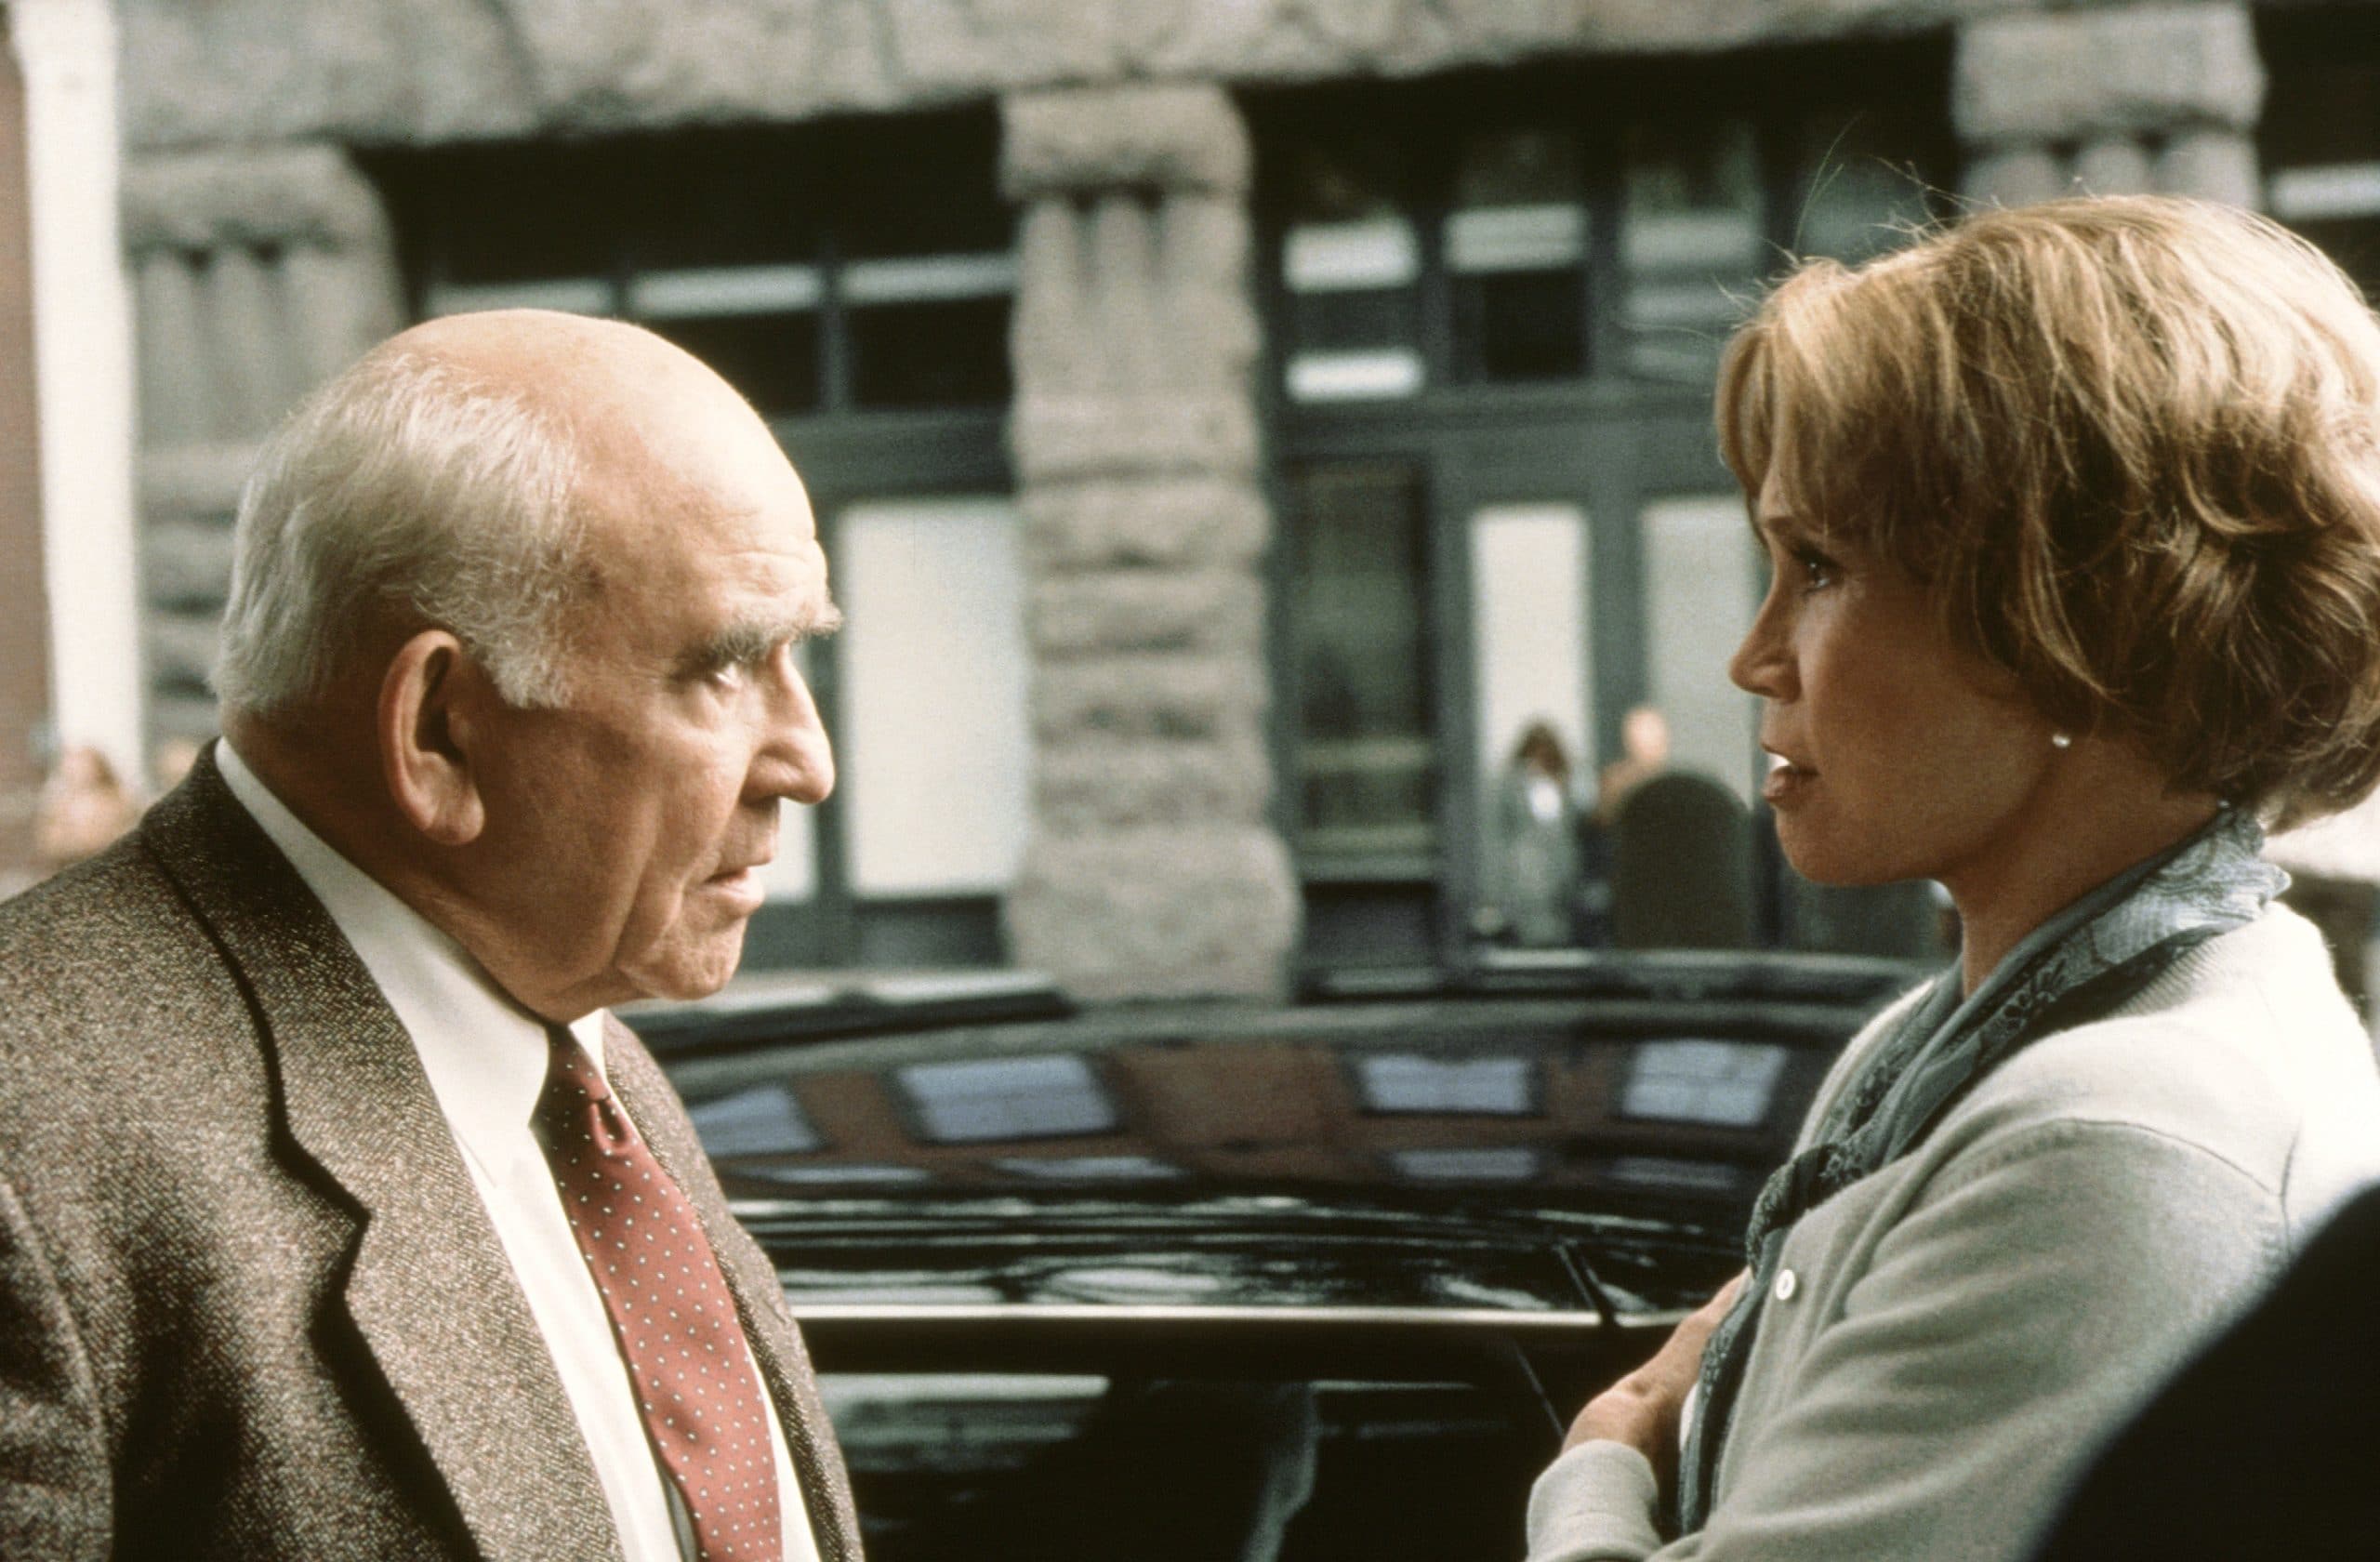 PAYBACK, (from left): Ed Asner, Mary Tyler Moore, 1997